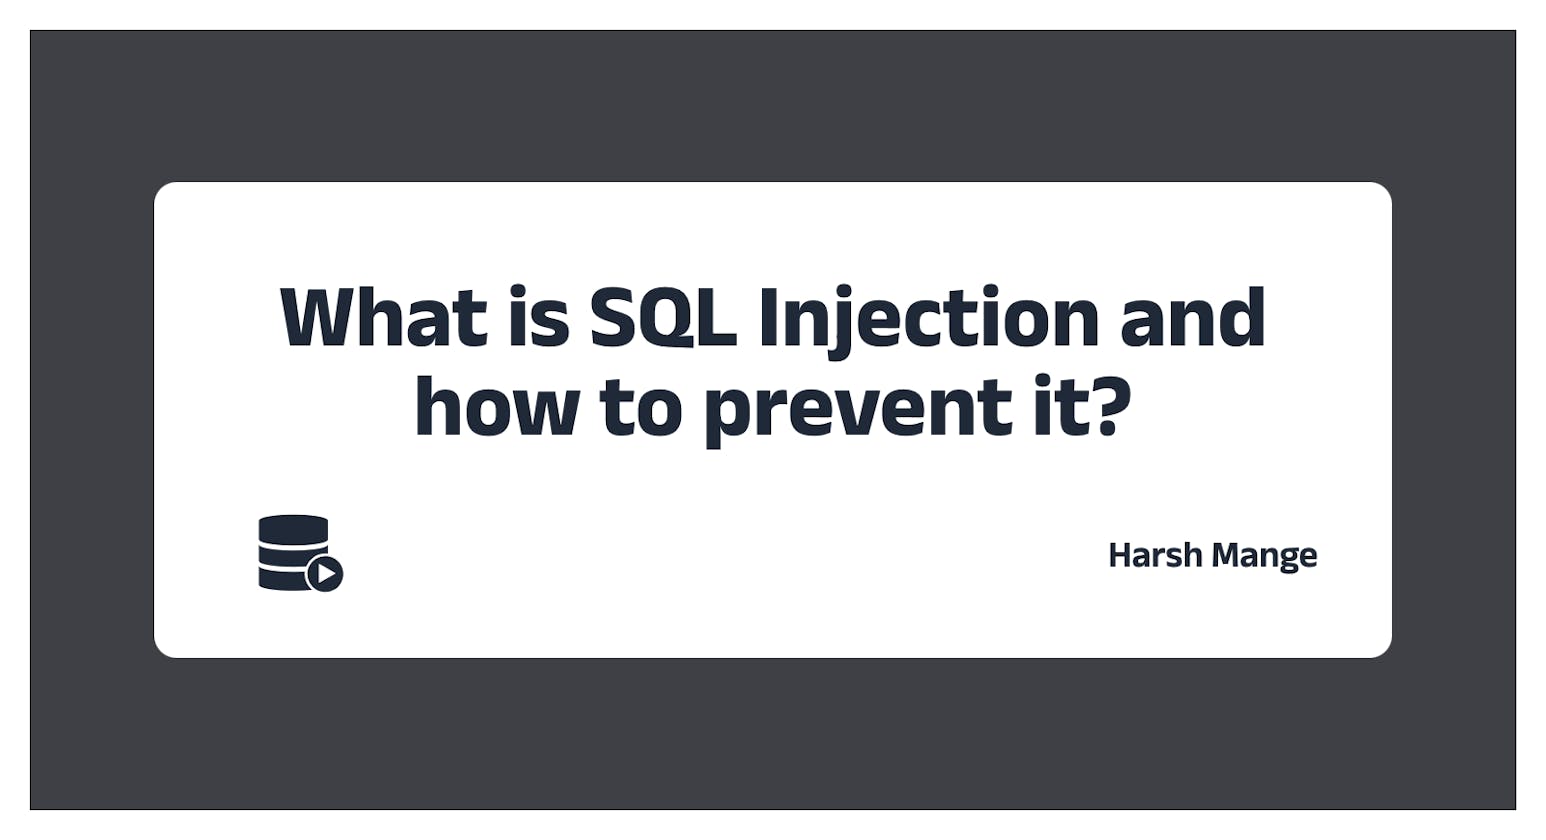 What is SQL Injection and how to prevent it?